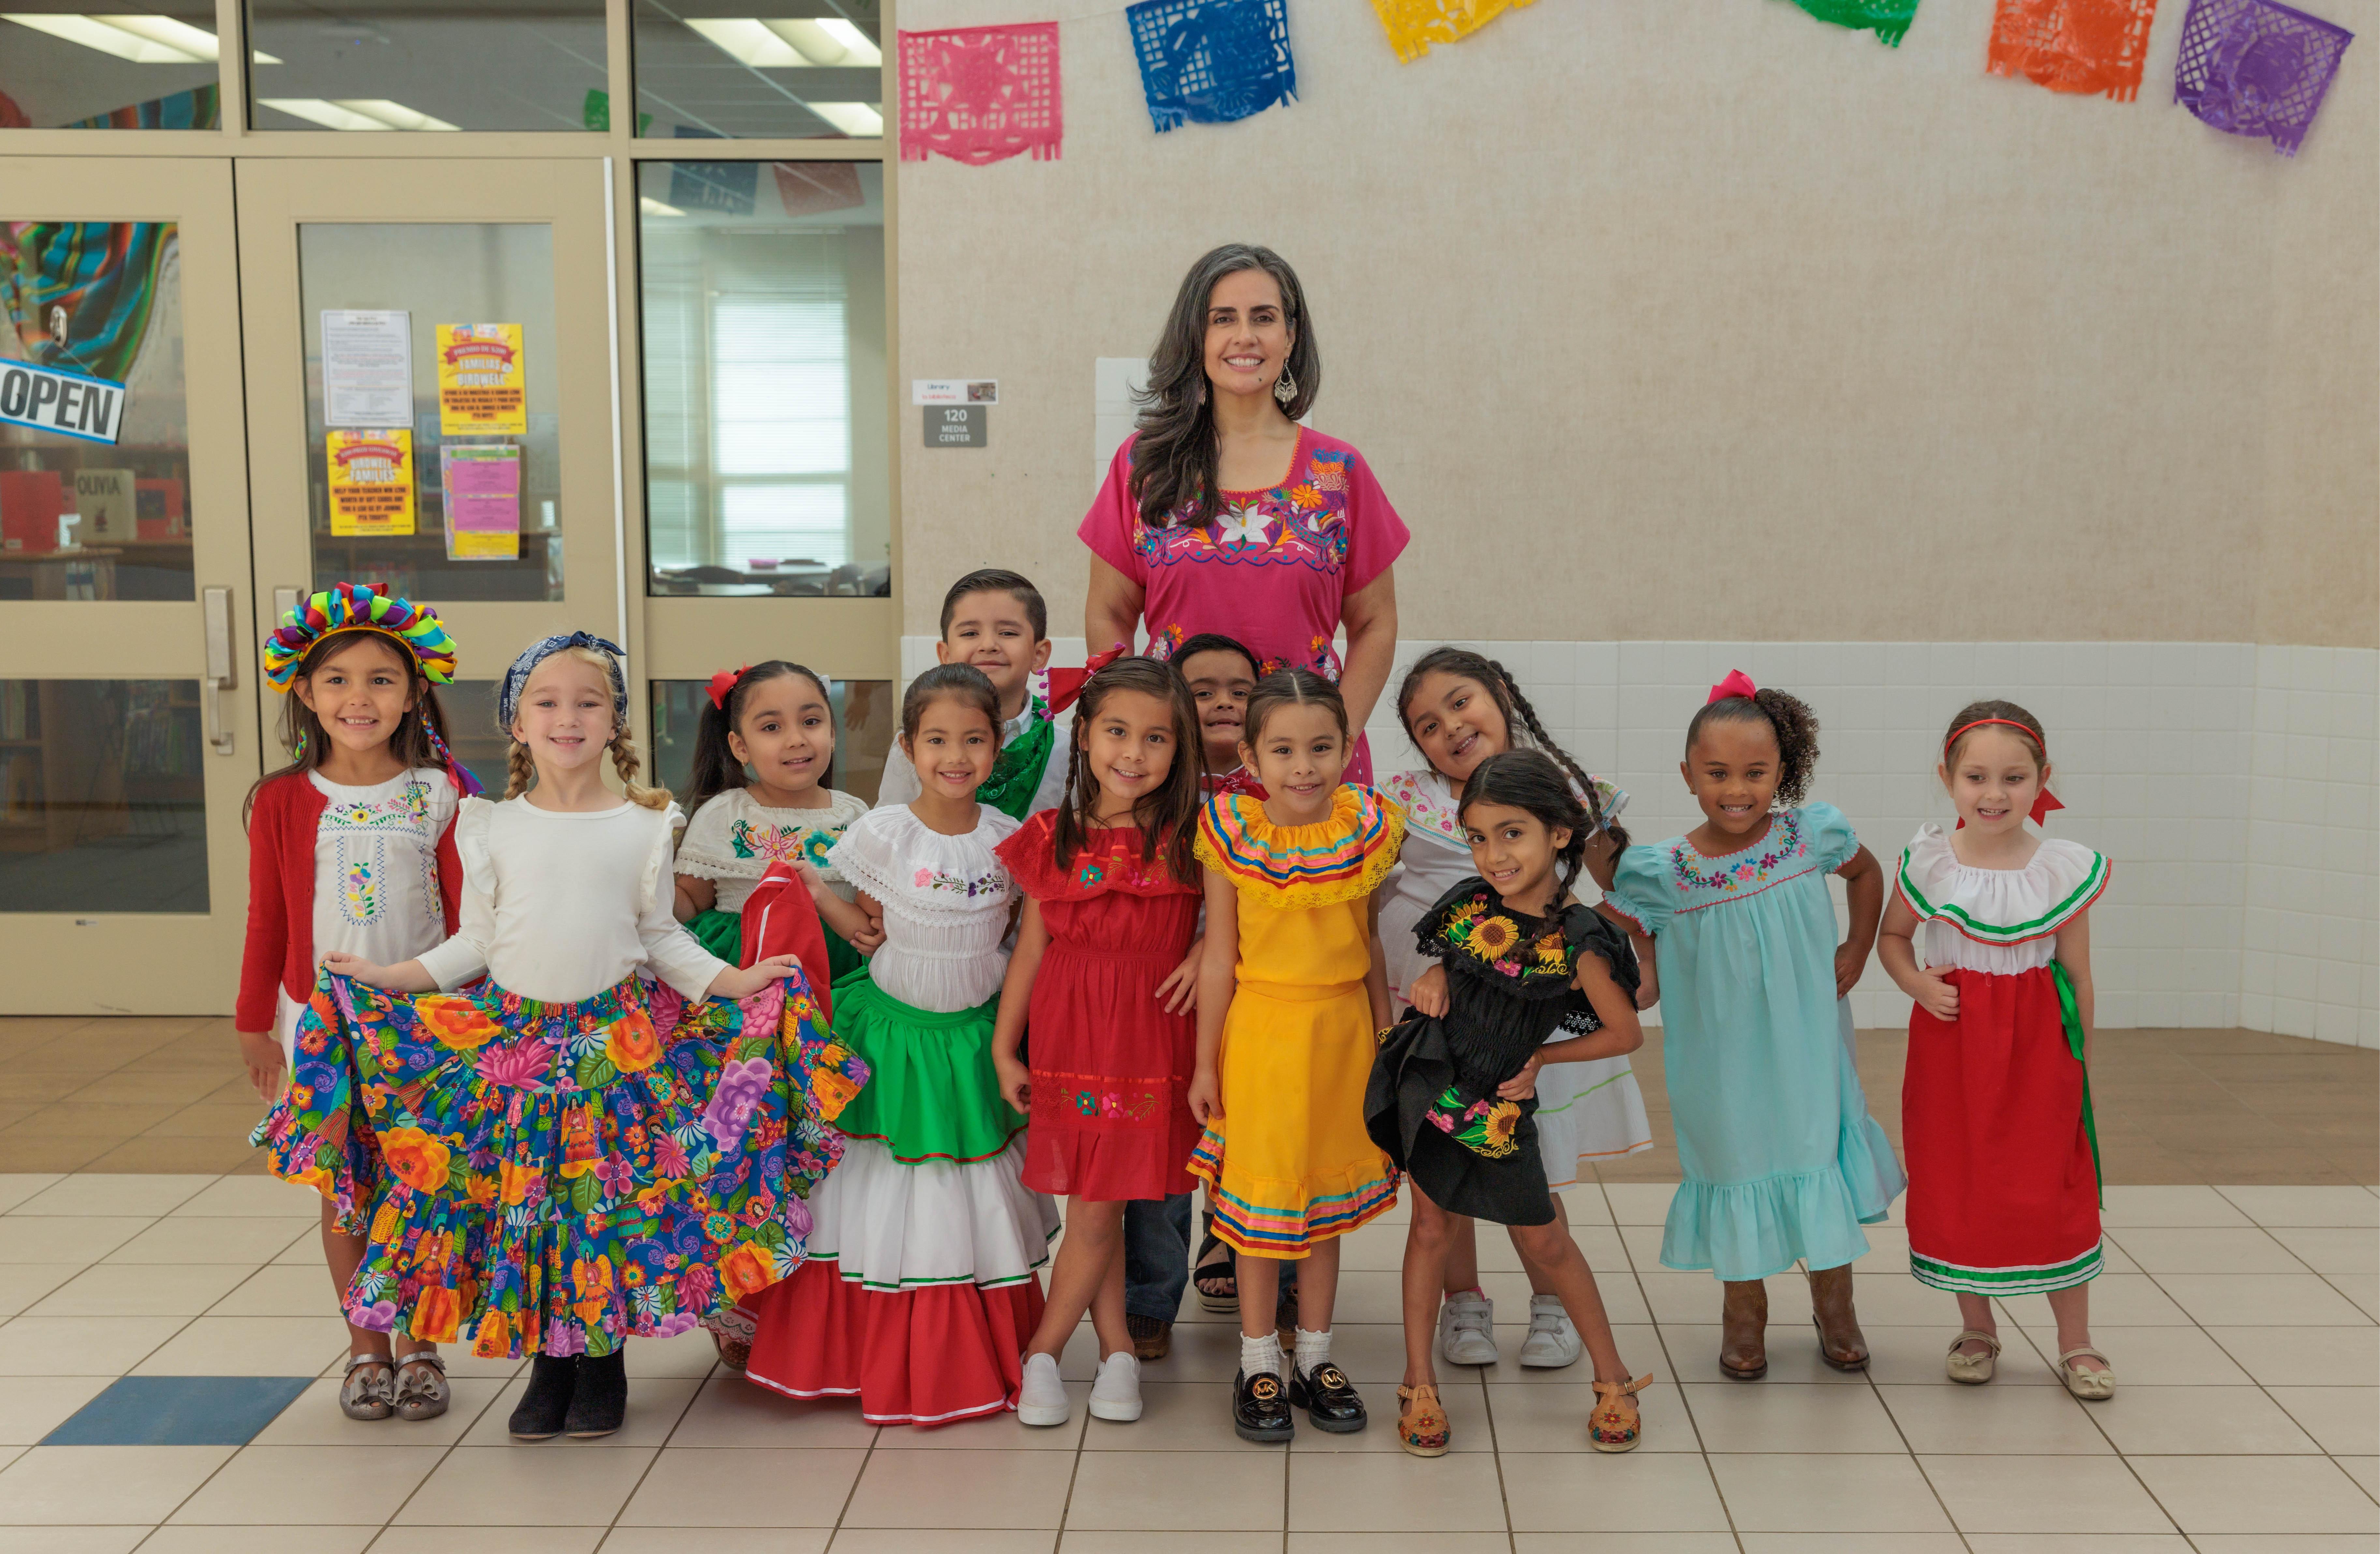 Mrs. Naranjo, the principal, with Kinder students in front of the library entrance in traditional Hispanic attire